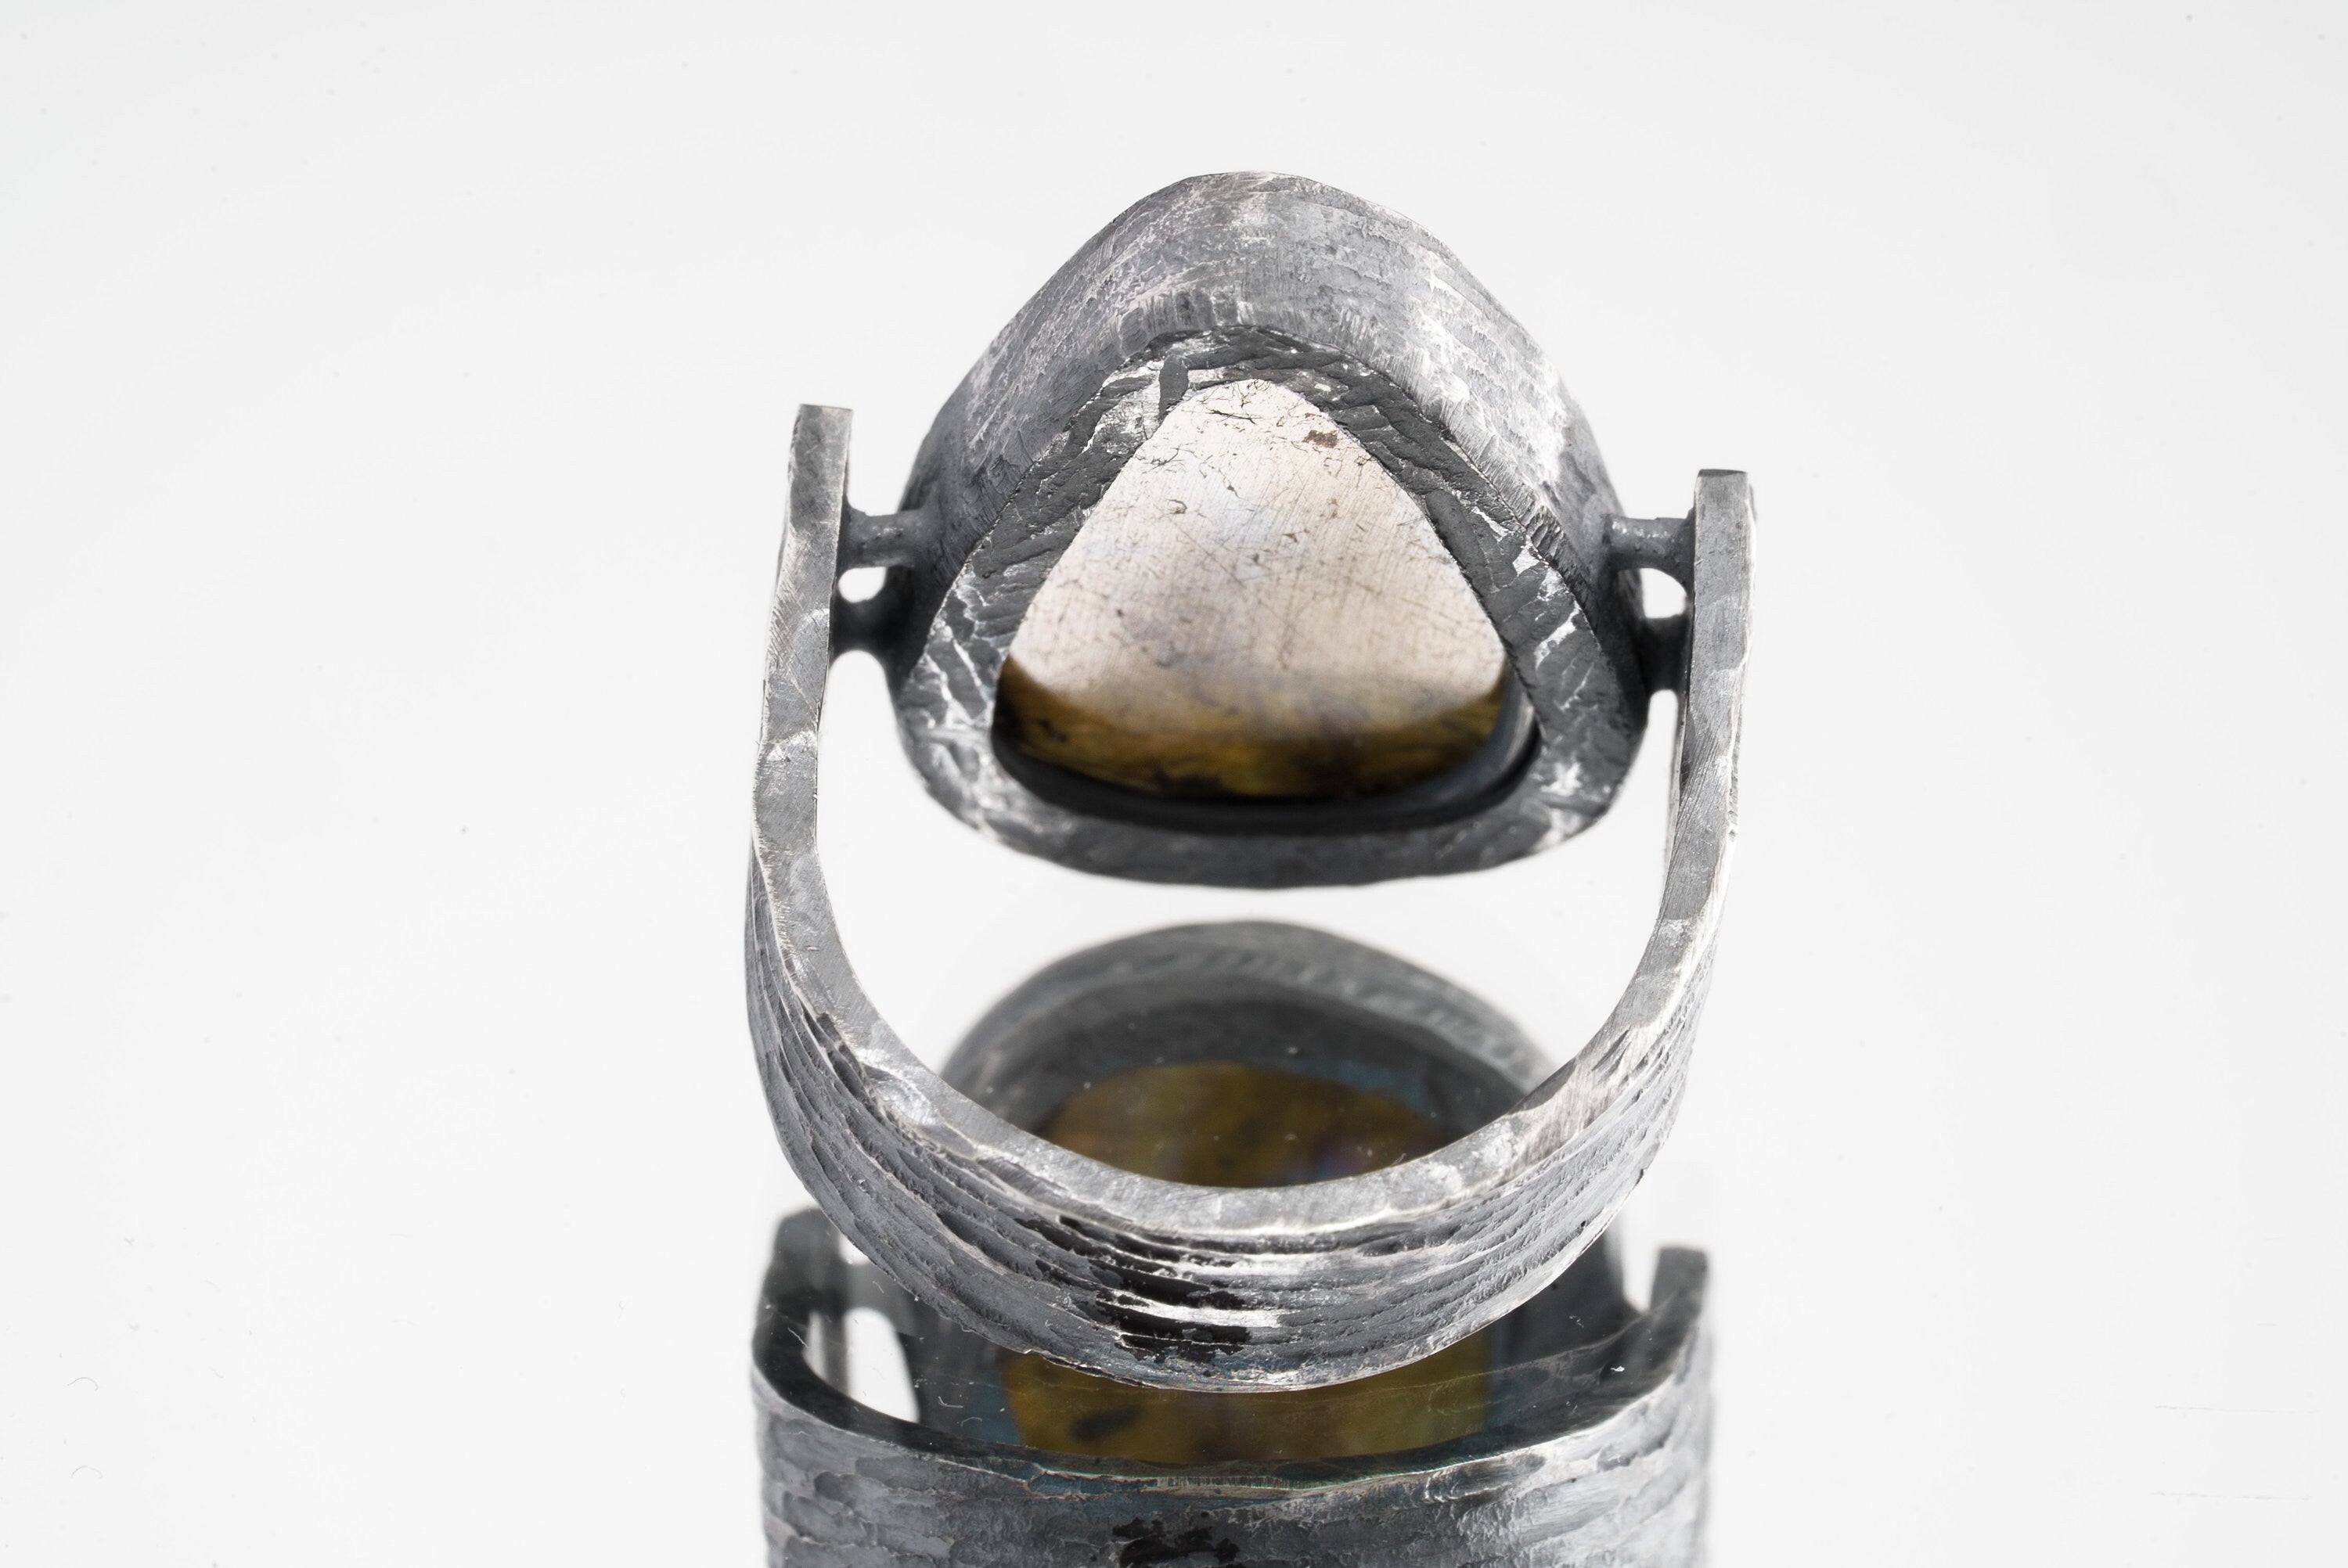 Golden Rutile Quartz - Rustic Comfortable Crystal Ring - Size 9 1/2 US - 925 Sterling Silver - Abstract Textured & Oxidised